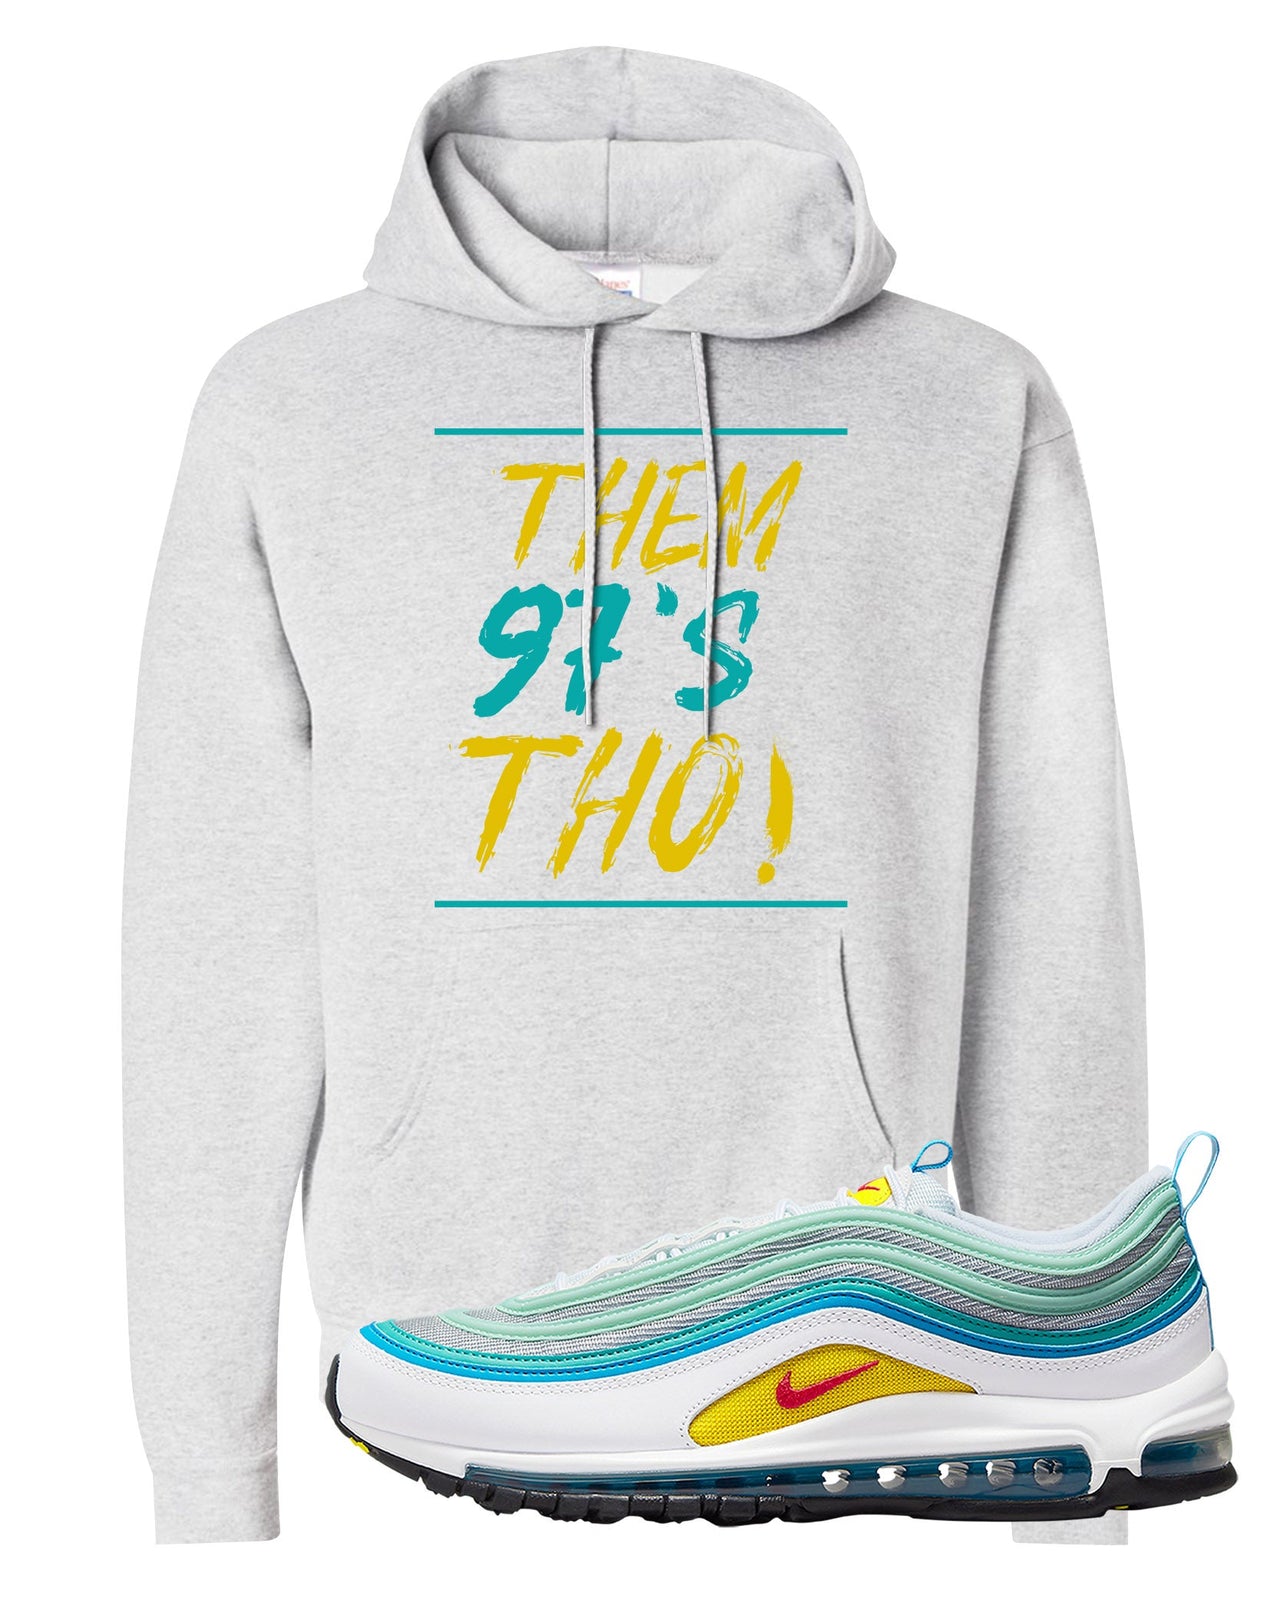 Spring Floral 97s Hoodie | Them 97's Tho, Ash